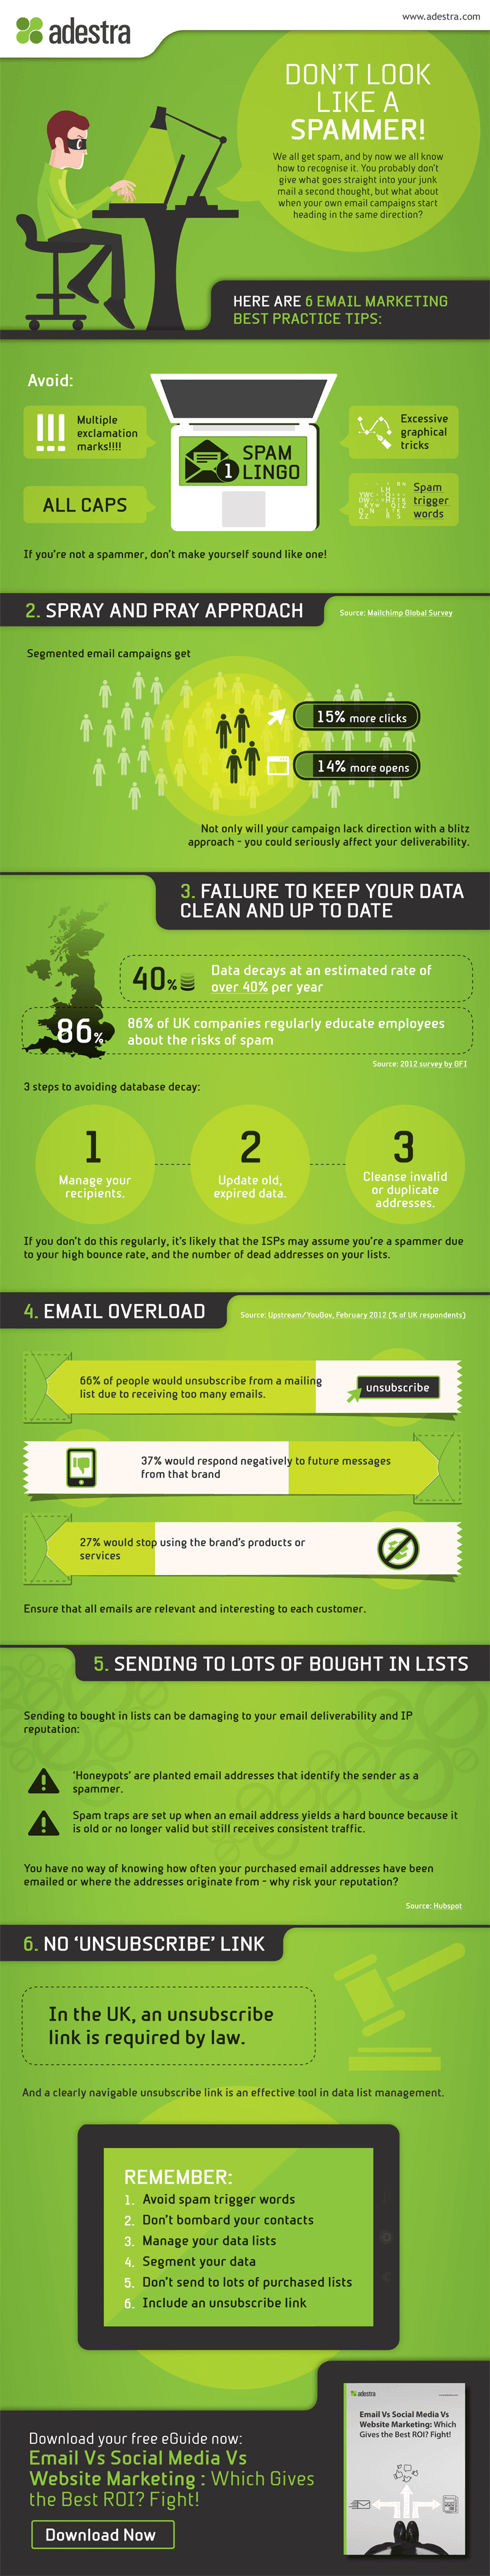 Guide: 6 Non-Spam Email Marketing Best Practices 